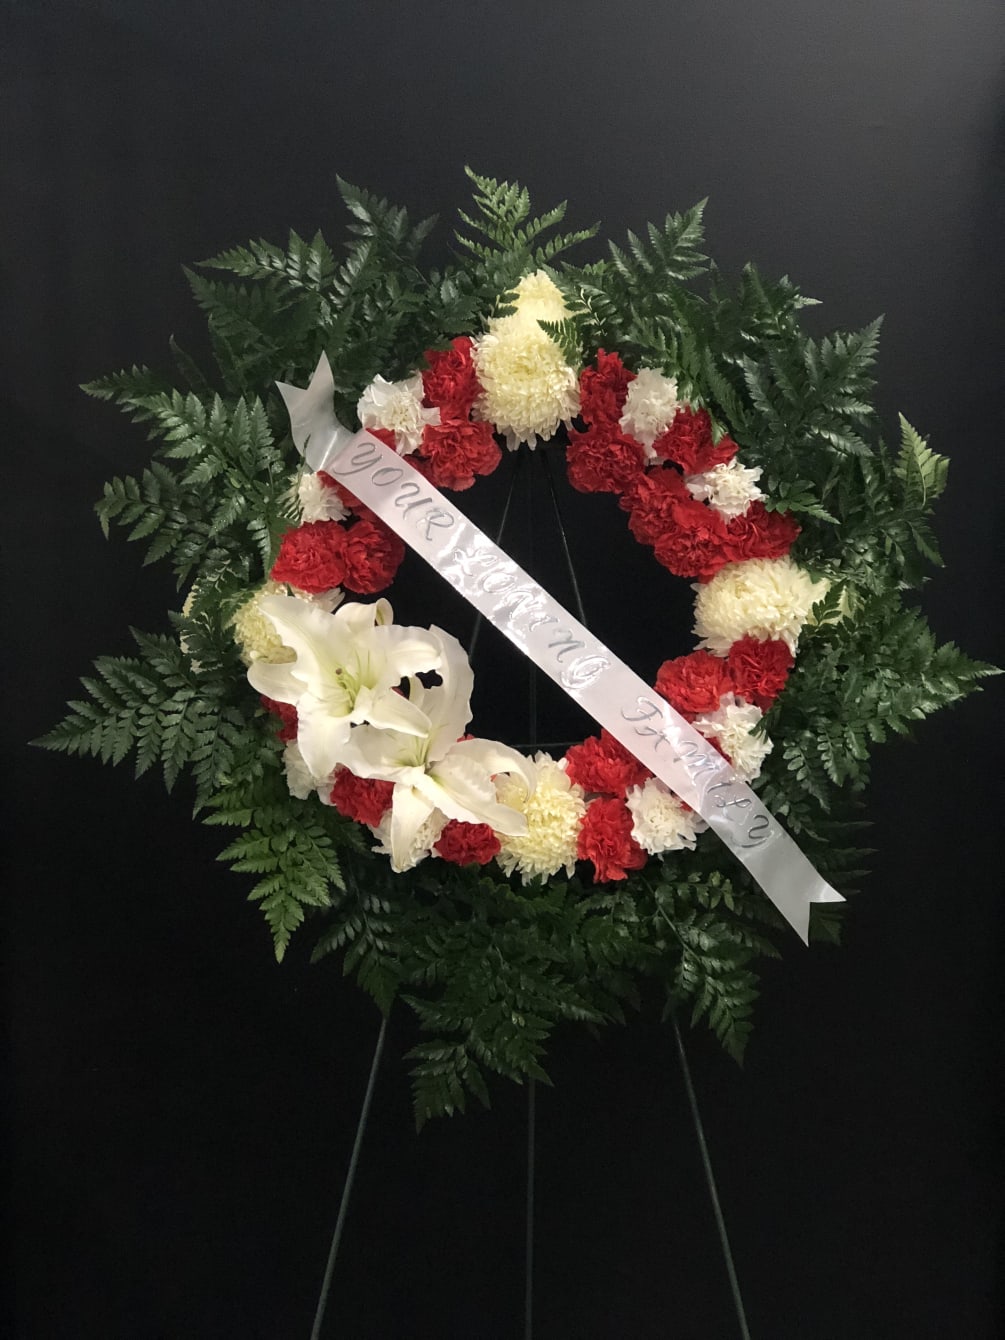 The circle of carnations with red and white with a white ribbon.